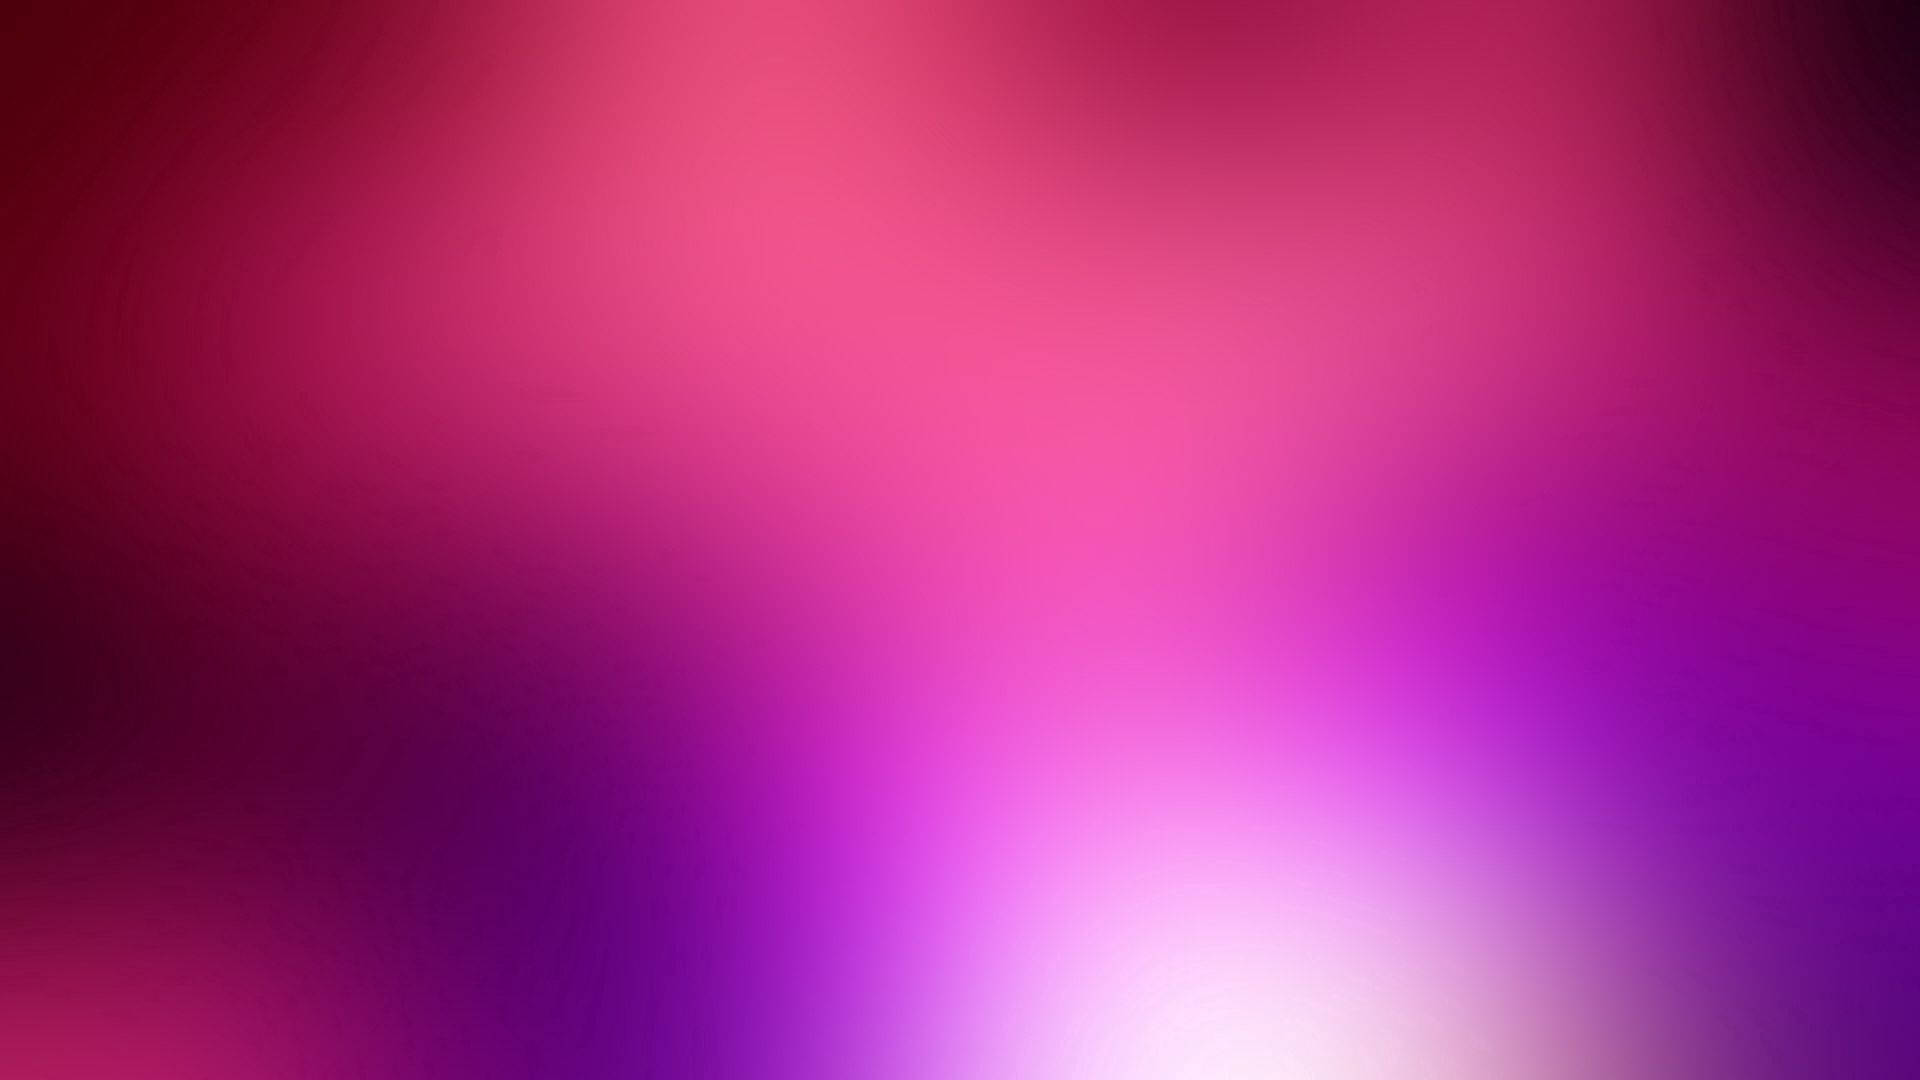 Bright pink and purple blurred wallpaper.